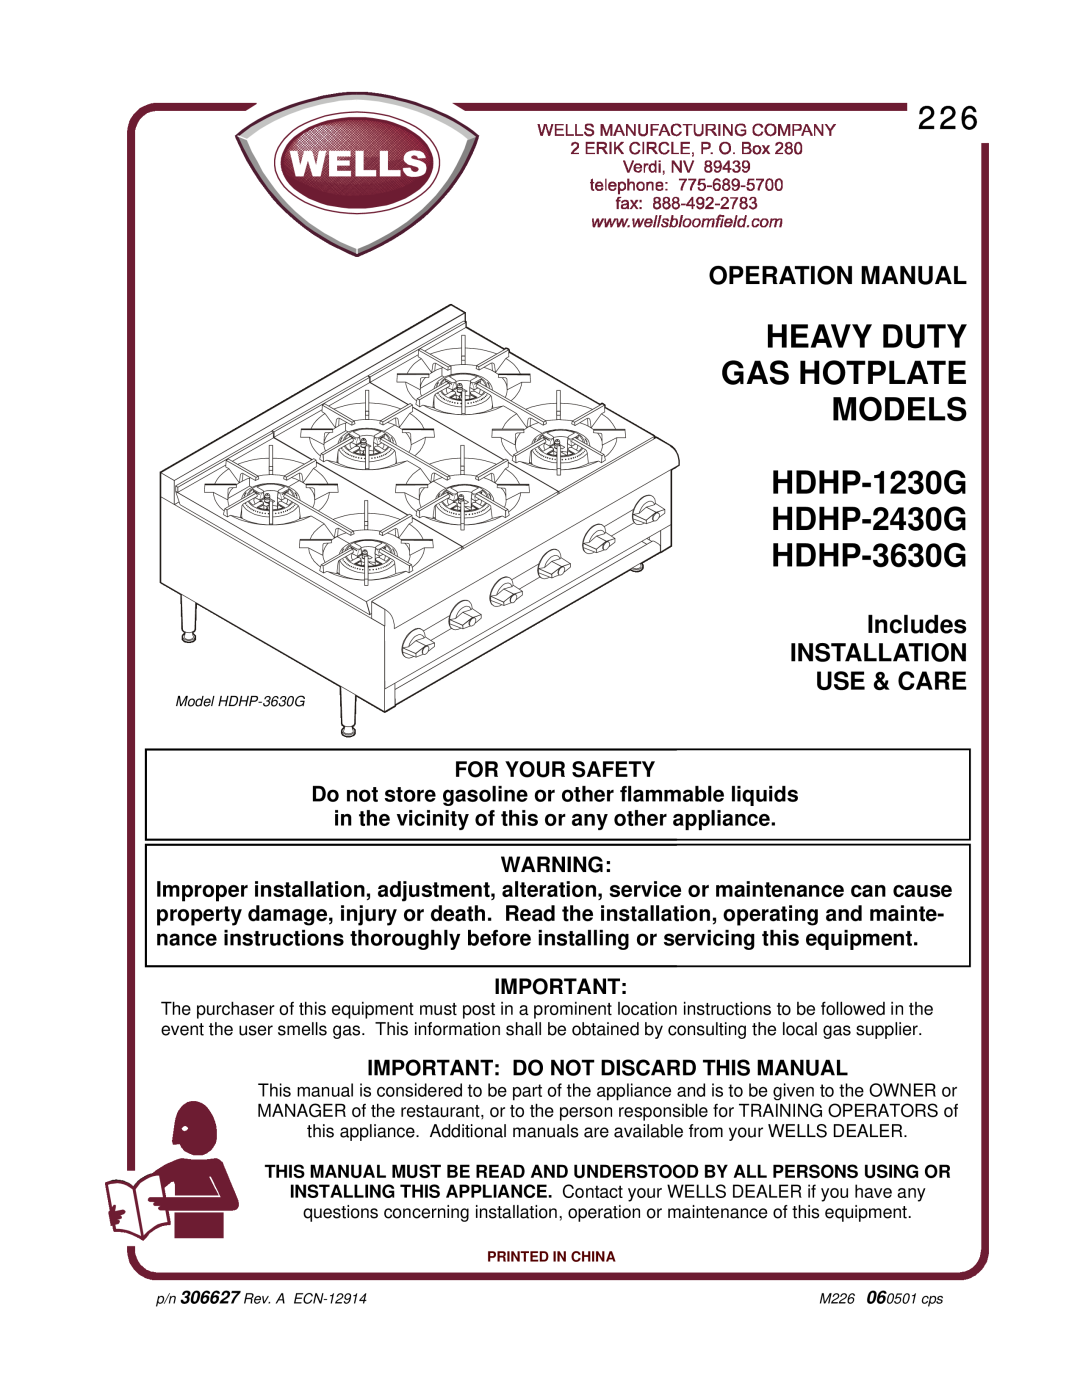 Wells HDHP-1230G, HDHP-3630G operation manual Includes INSTALLATION USE & CARE, Important Do Not Discard This Manual 